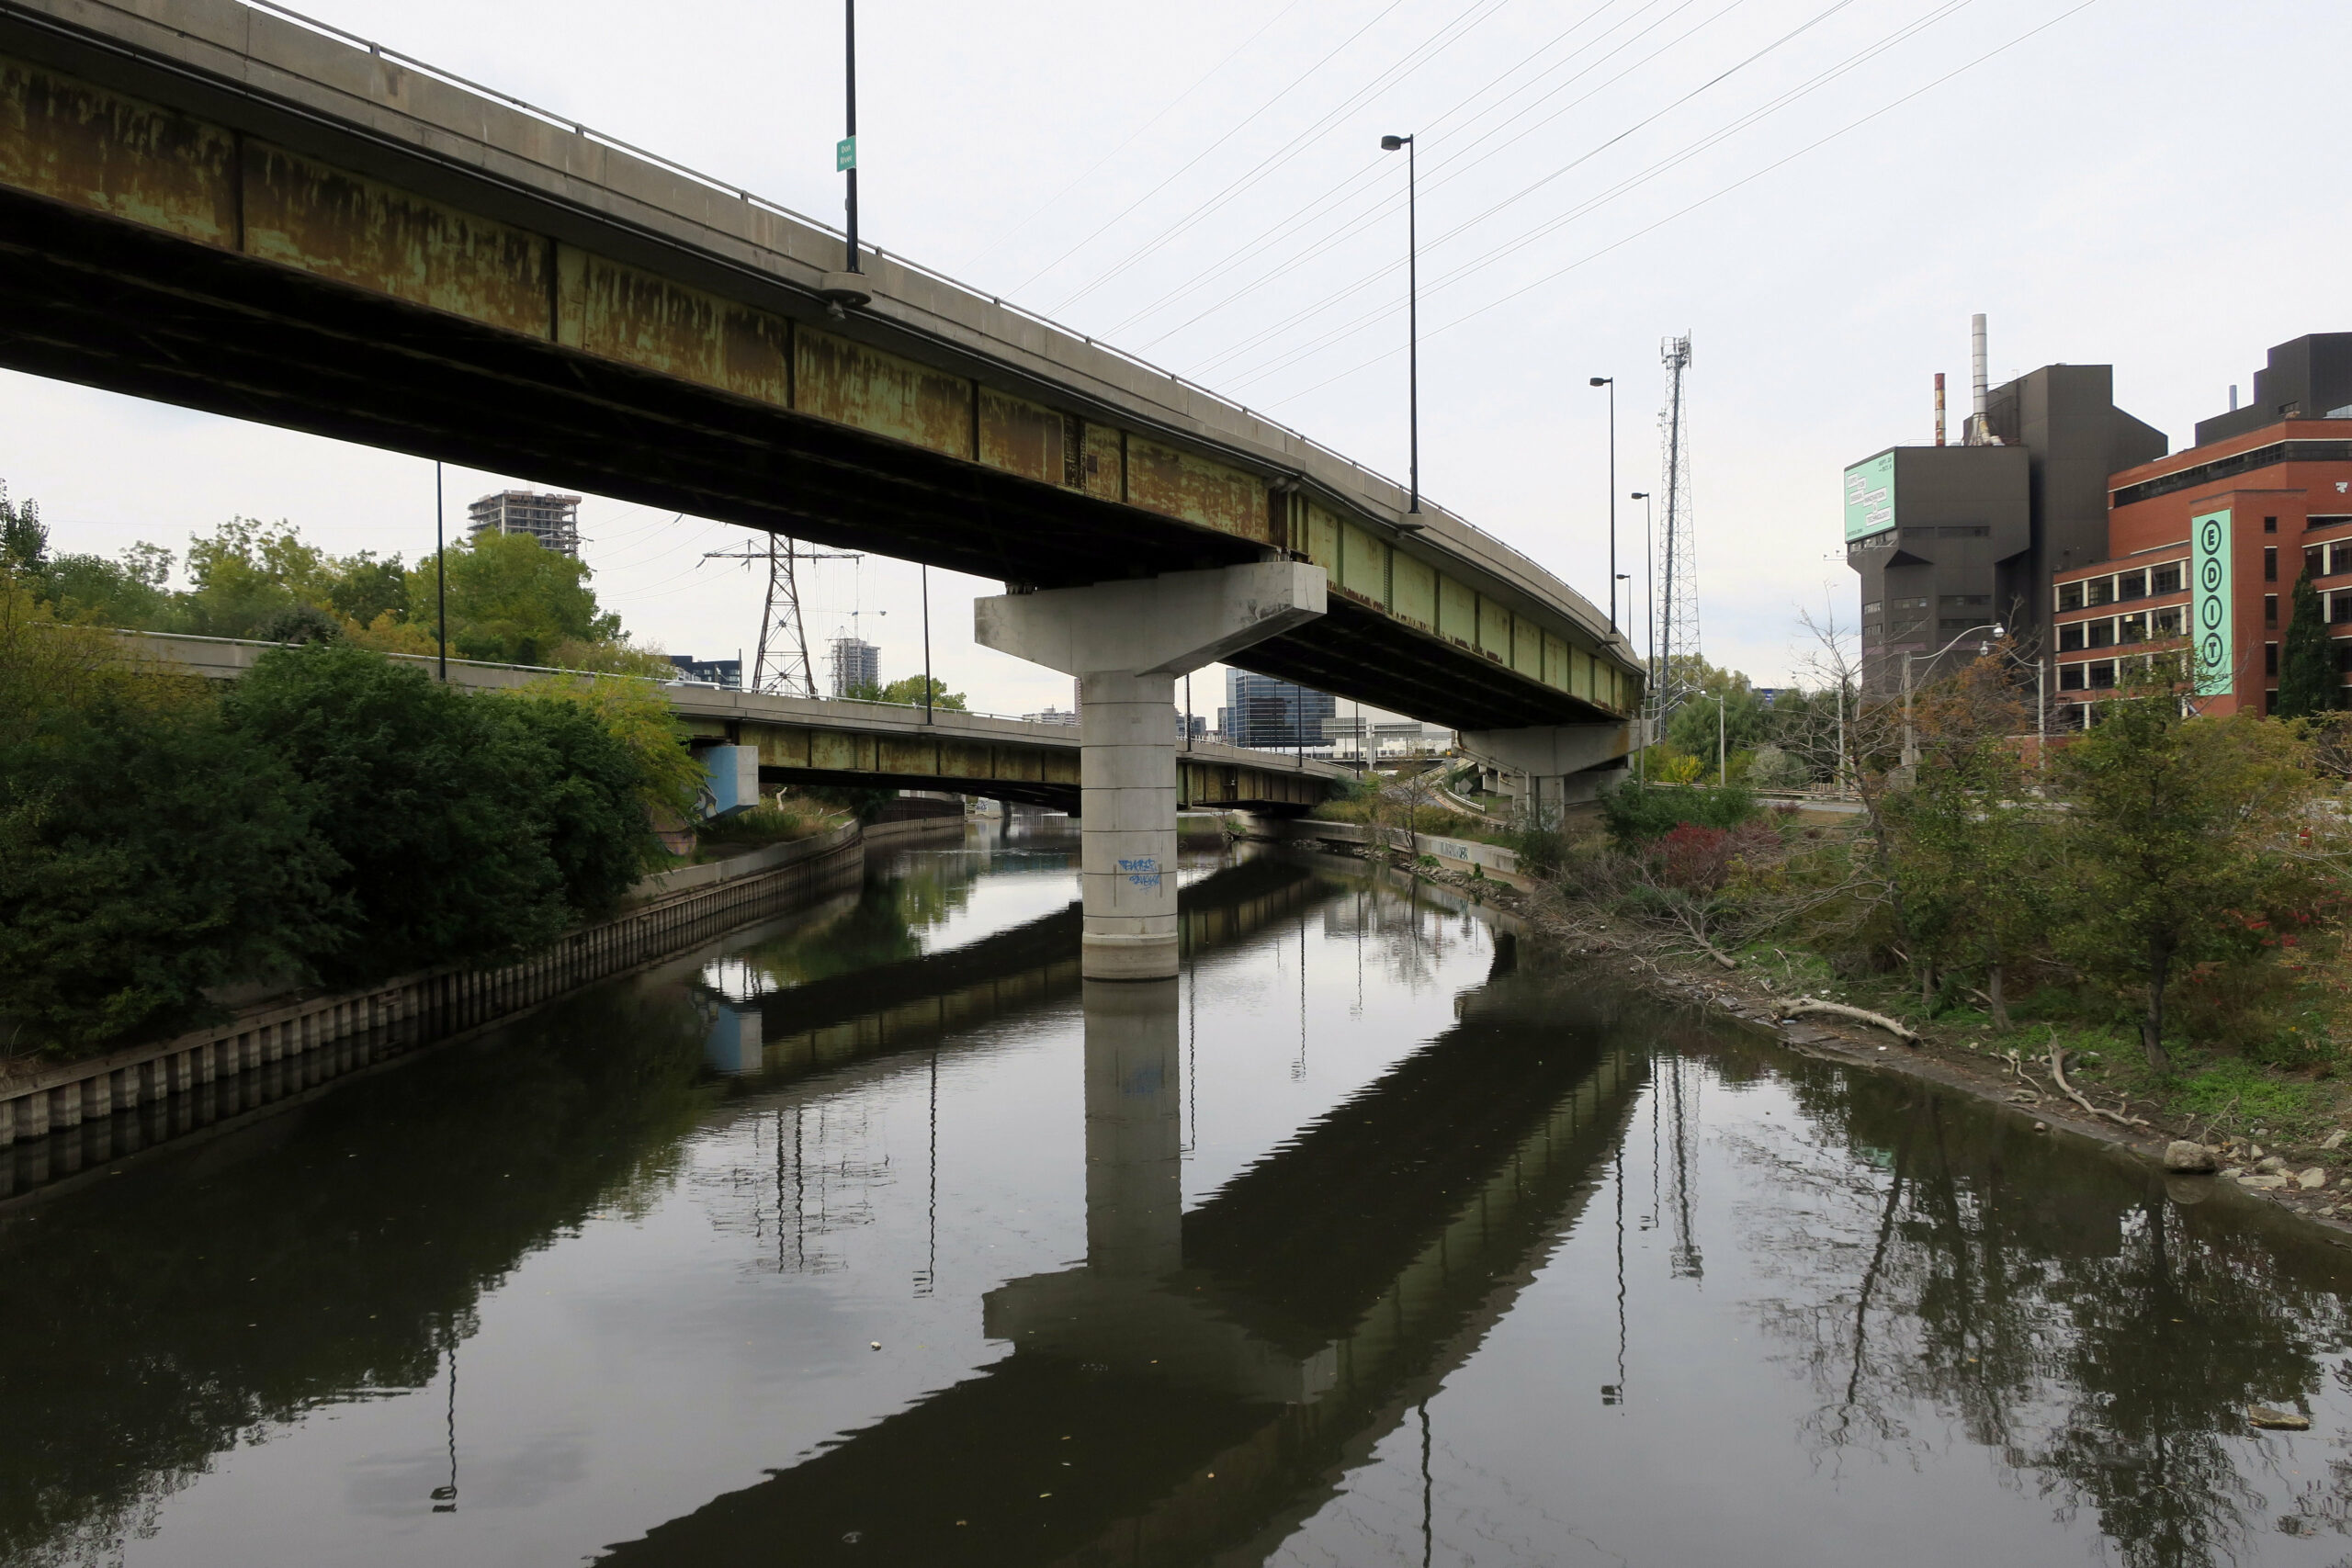 A highway bridge over the muddy water of the Don River in downtown Toronto, with buildings in the background against a grey sky.